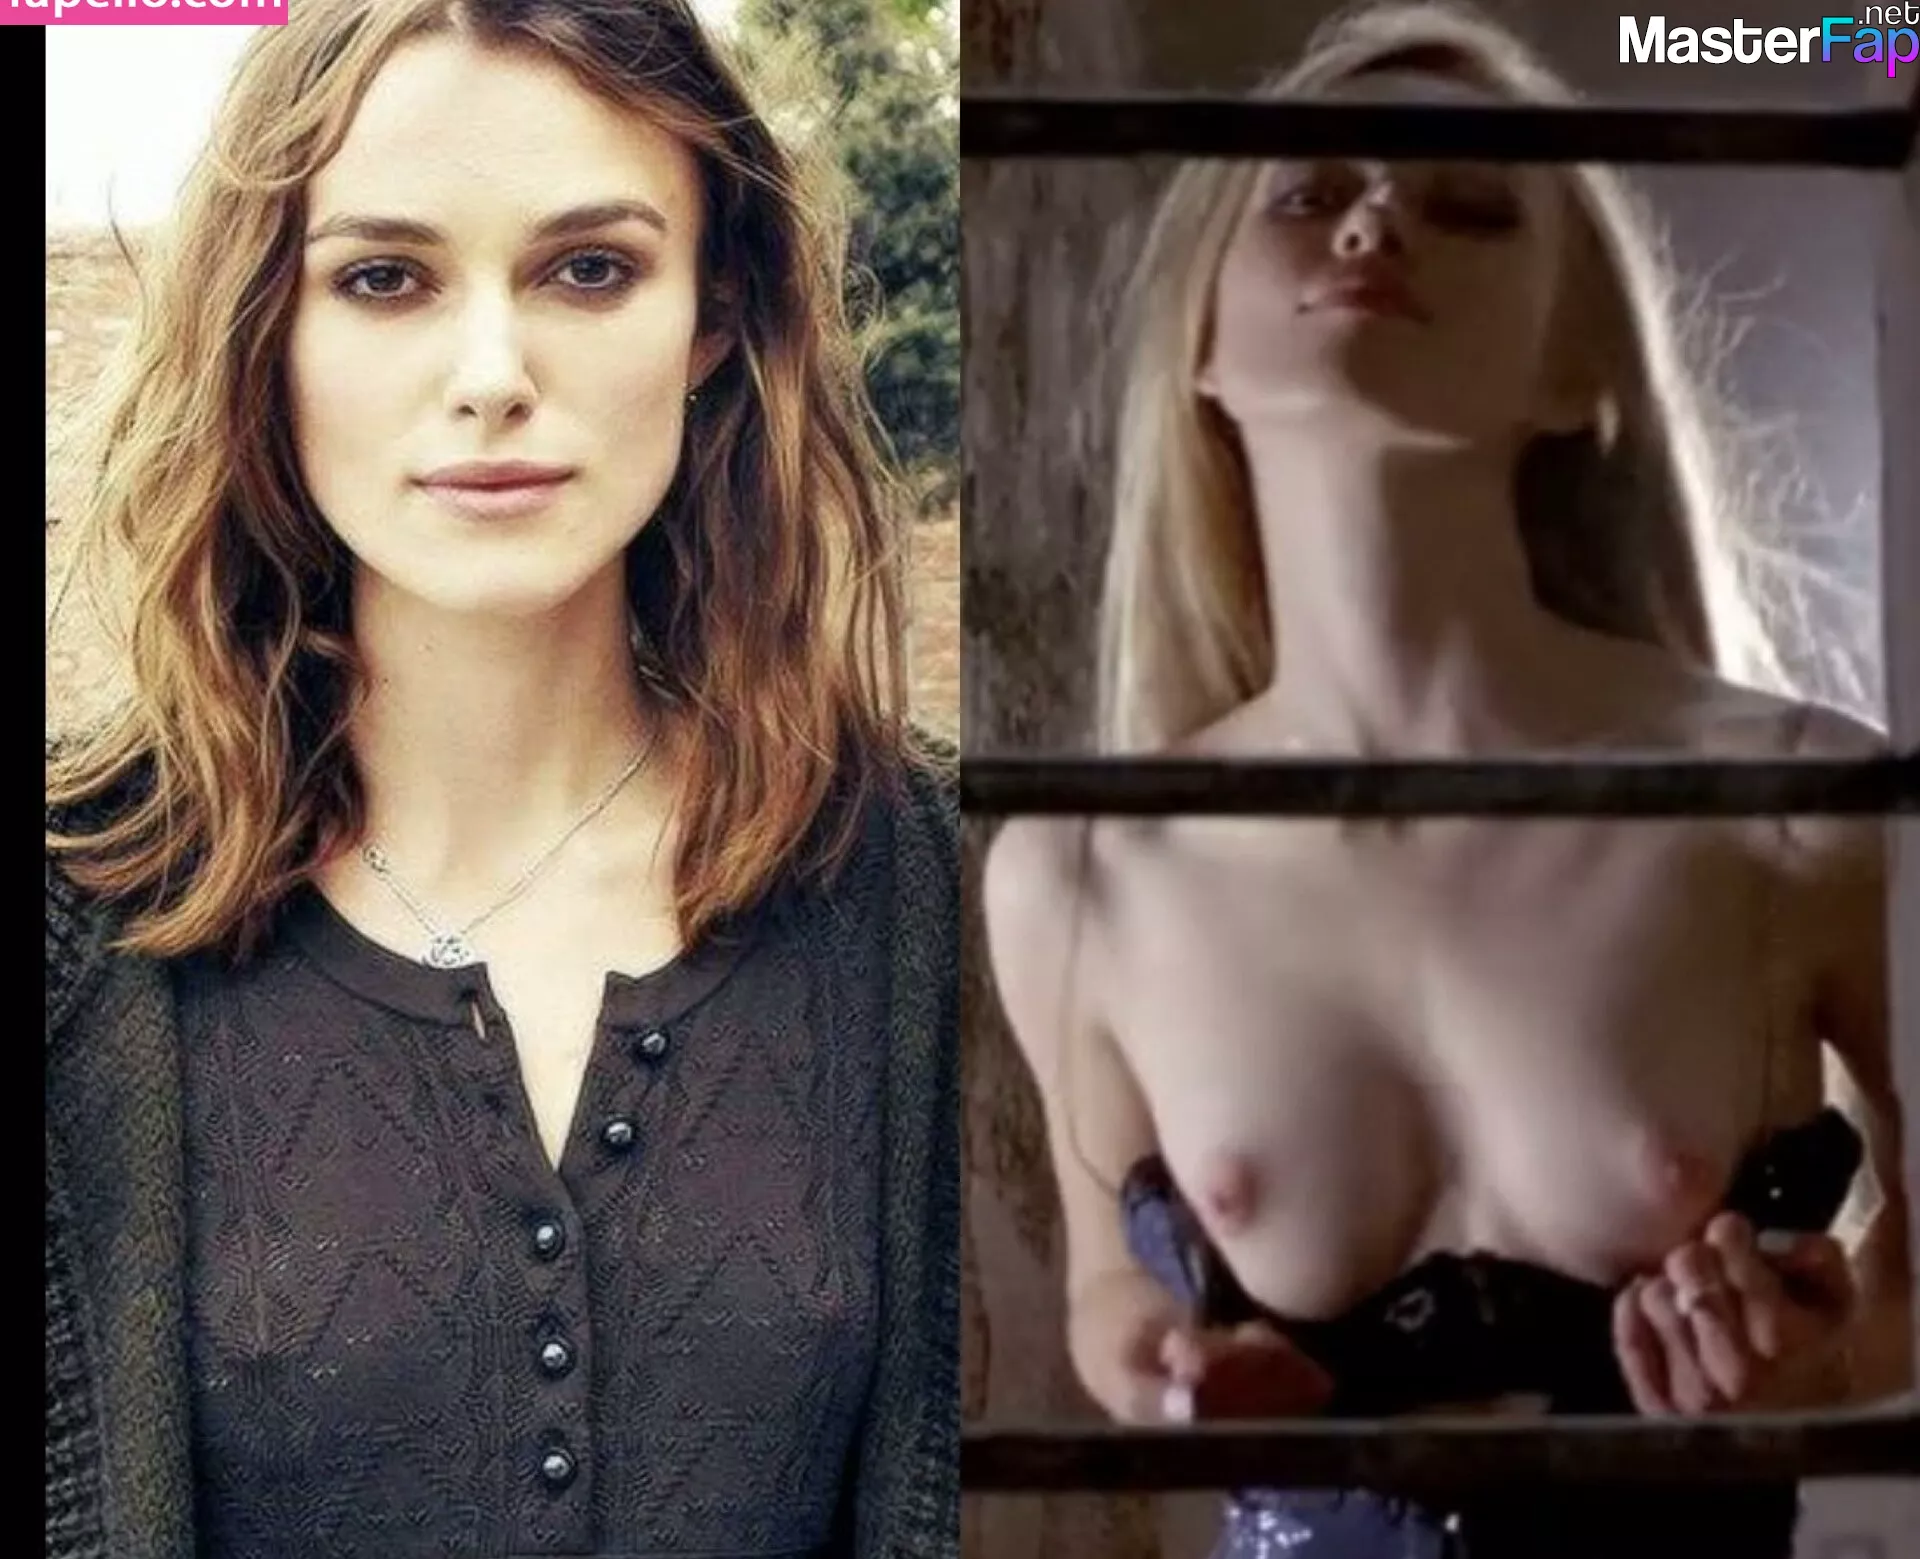 aye minn htun recommends keira knightley topless pic pic